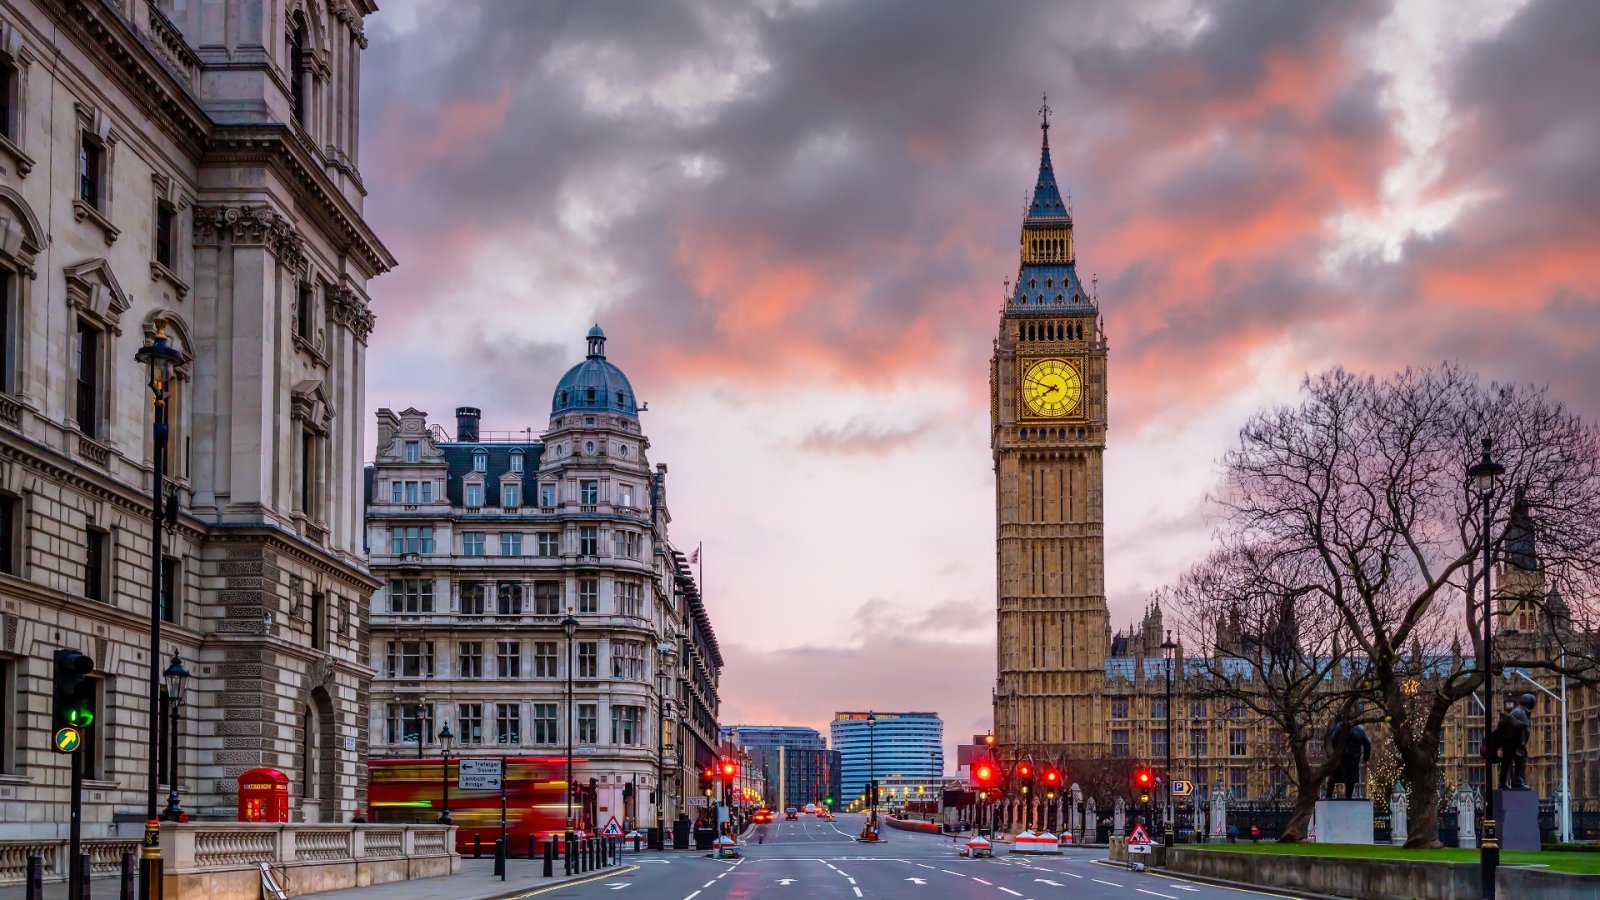 Looking for free things to do in London? Here are 10 cost-free activities in UK's capital